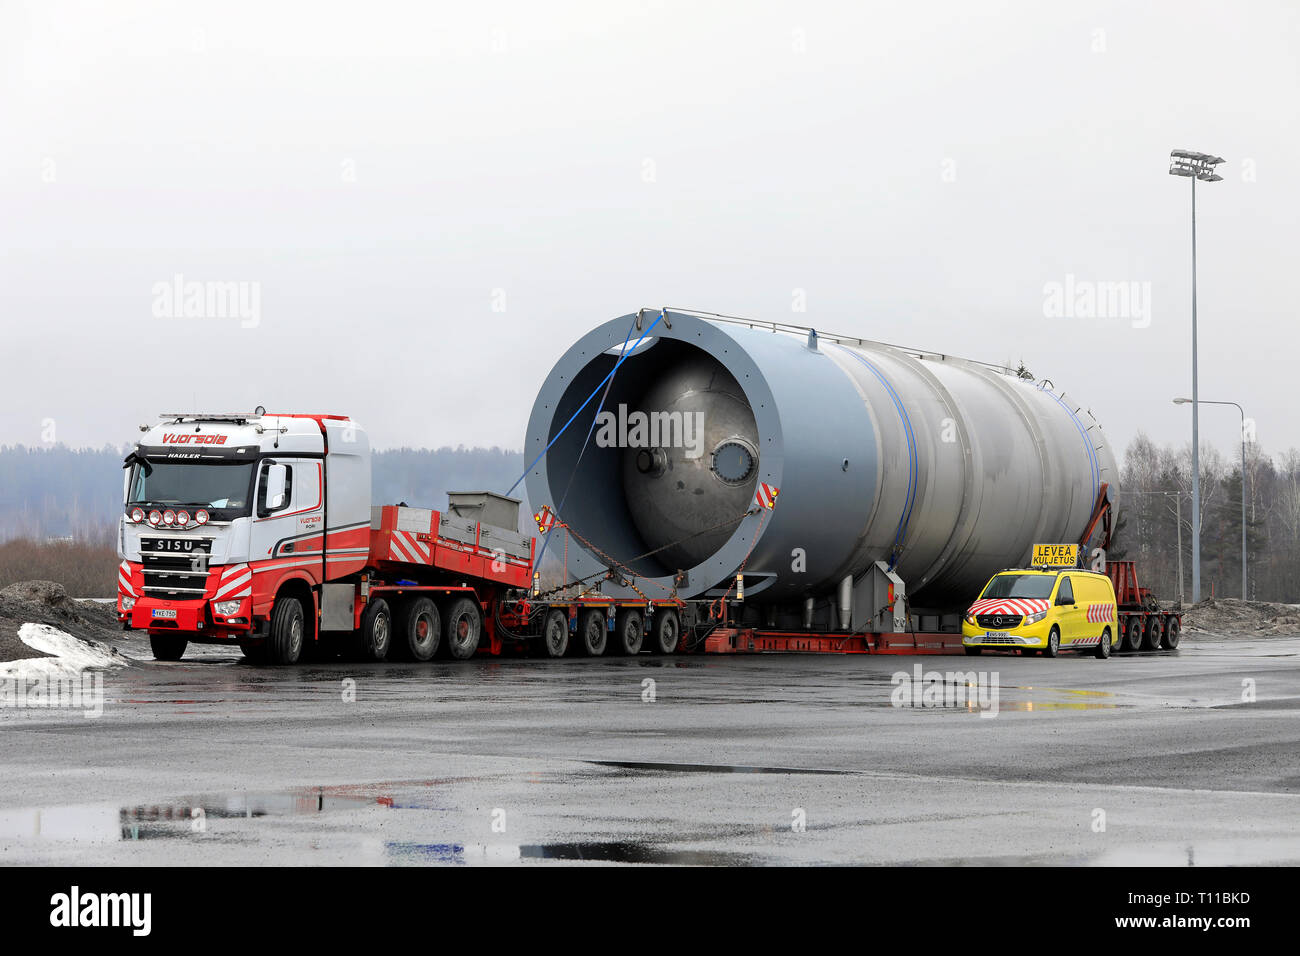 Forssa, Finland - March 16, 2019: Sisu Polar Hauler 625 of Vuorsola Oy in front of oversize load silo. Lenght of transport 45 meters, weight 156 Tonne Stock Photo